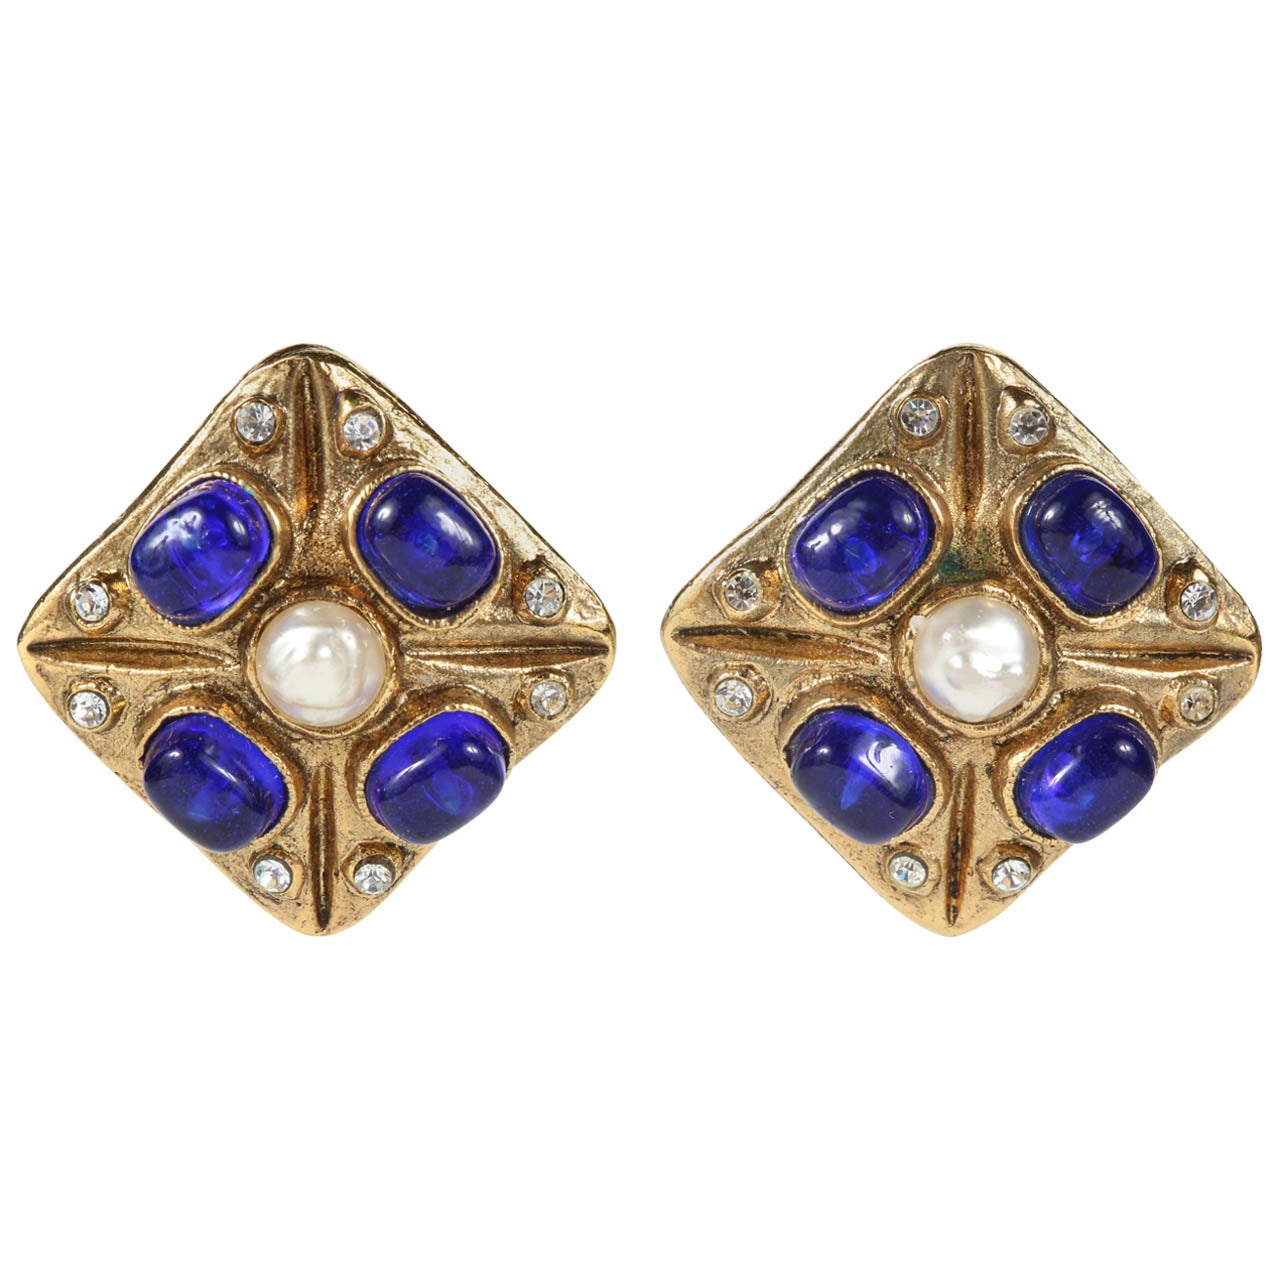 Pair of Chanel Cobalt Poured Glass Ear Clips